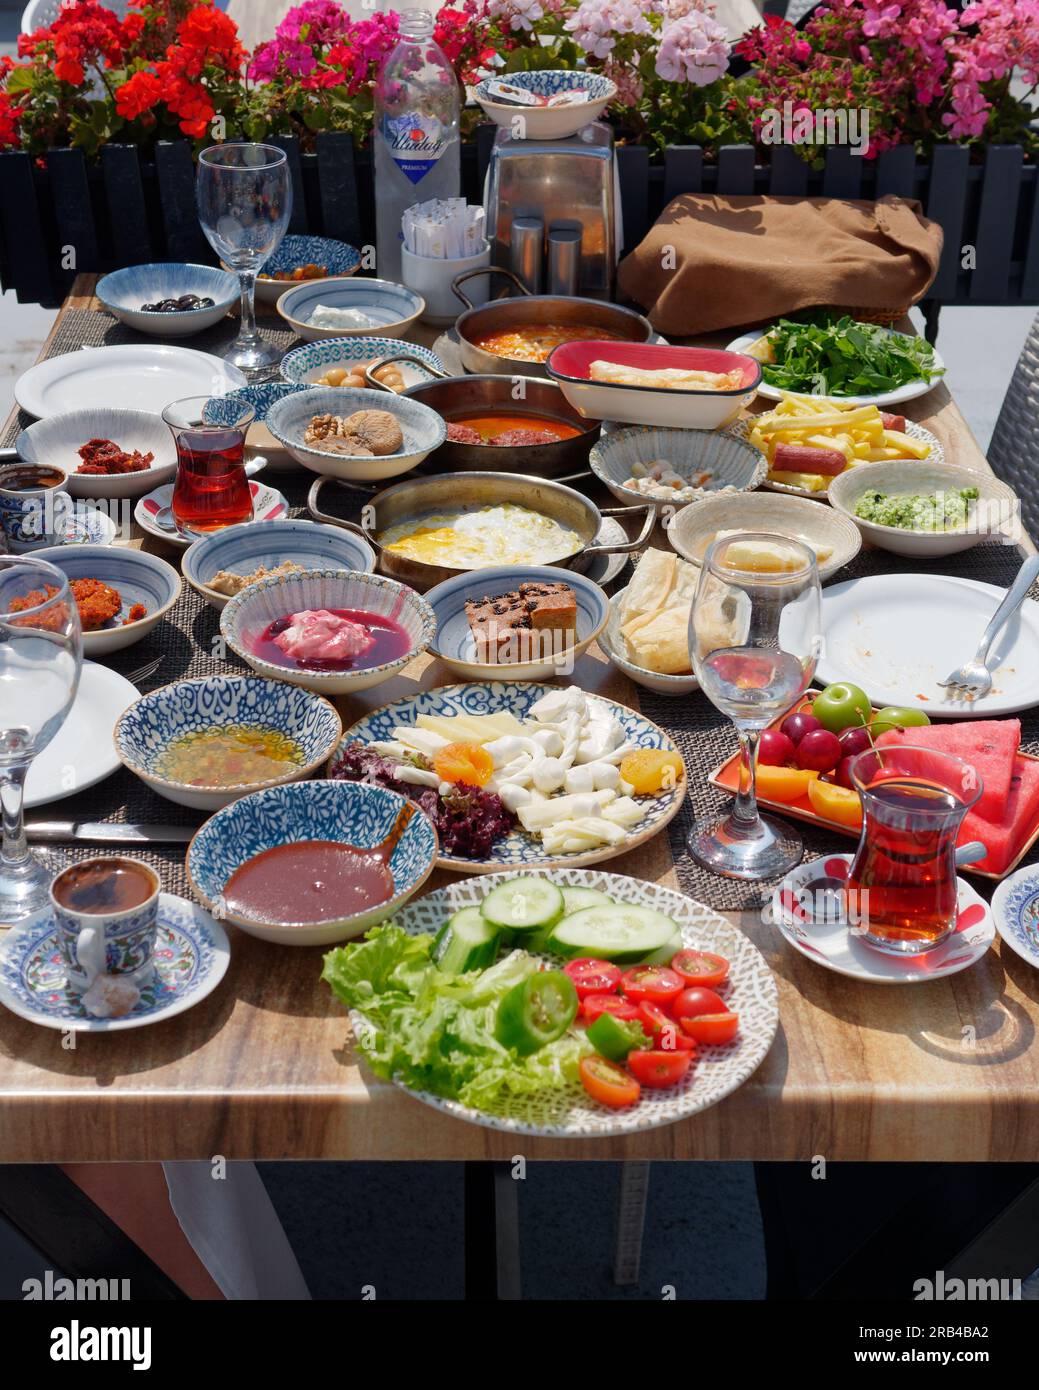 Platter of food for breakfast or brunch including Turkish Tea at the Seven Hills Restaurant, Istanbul, Turkey Stock Photo